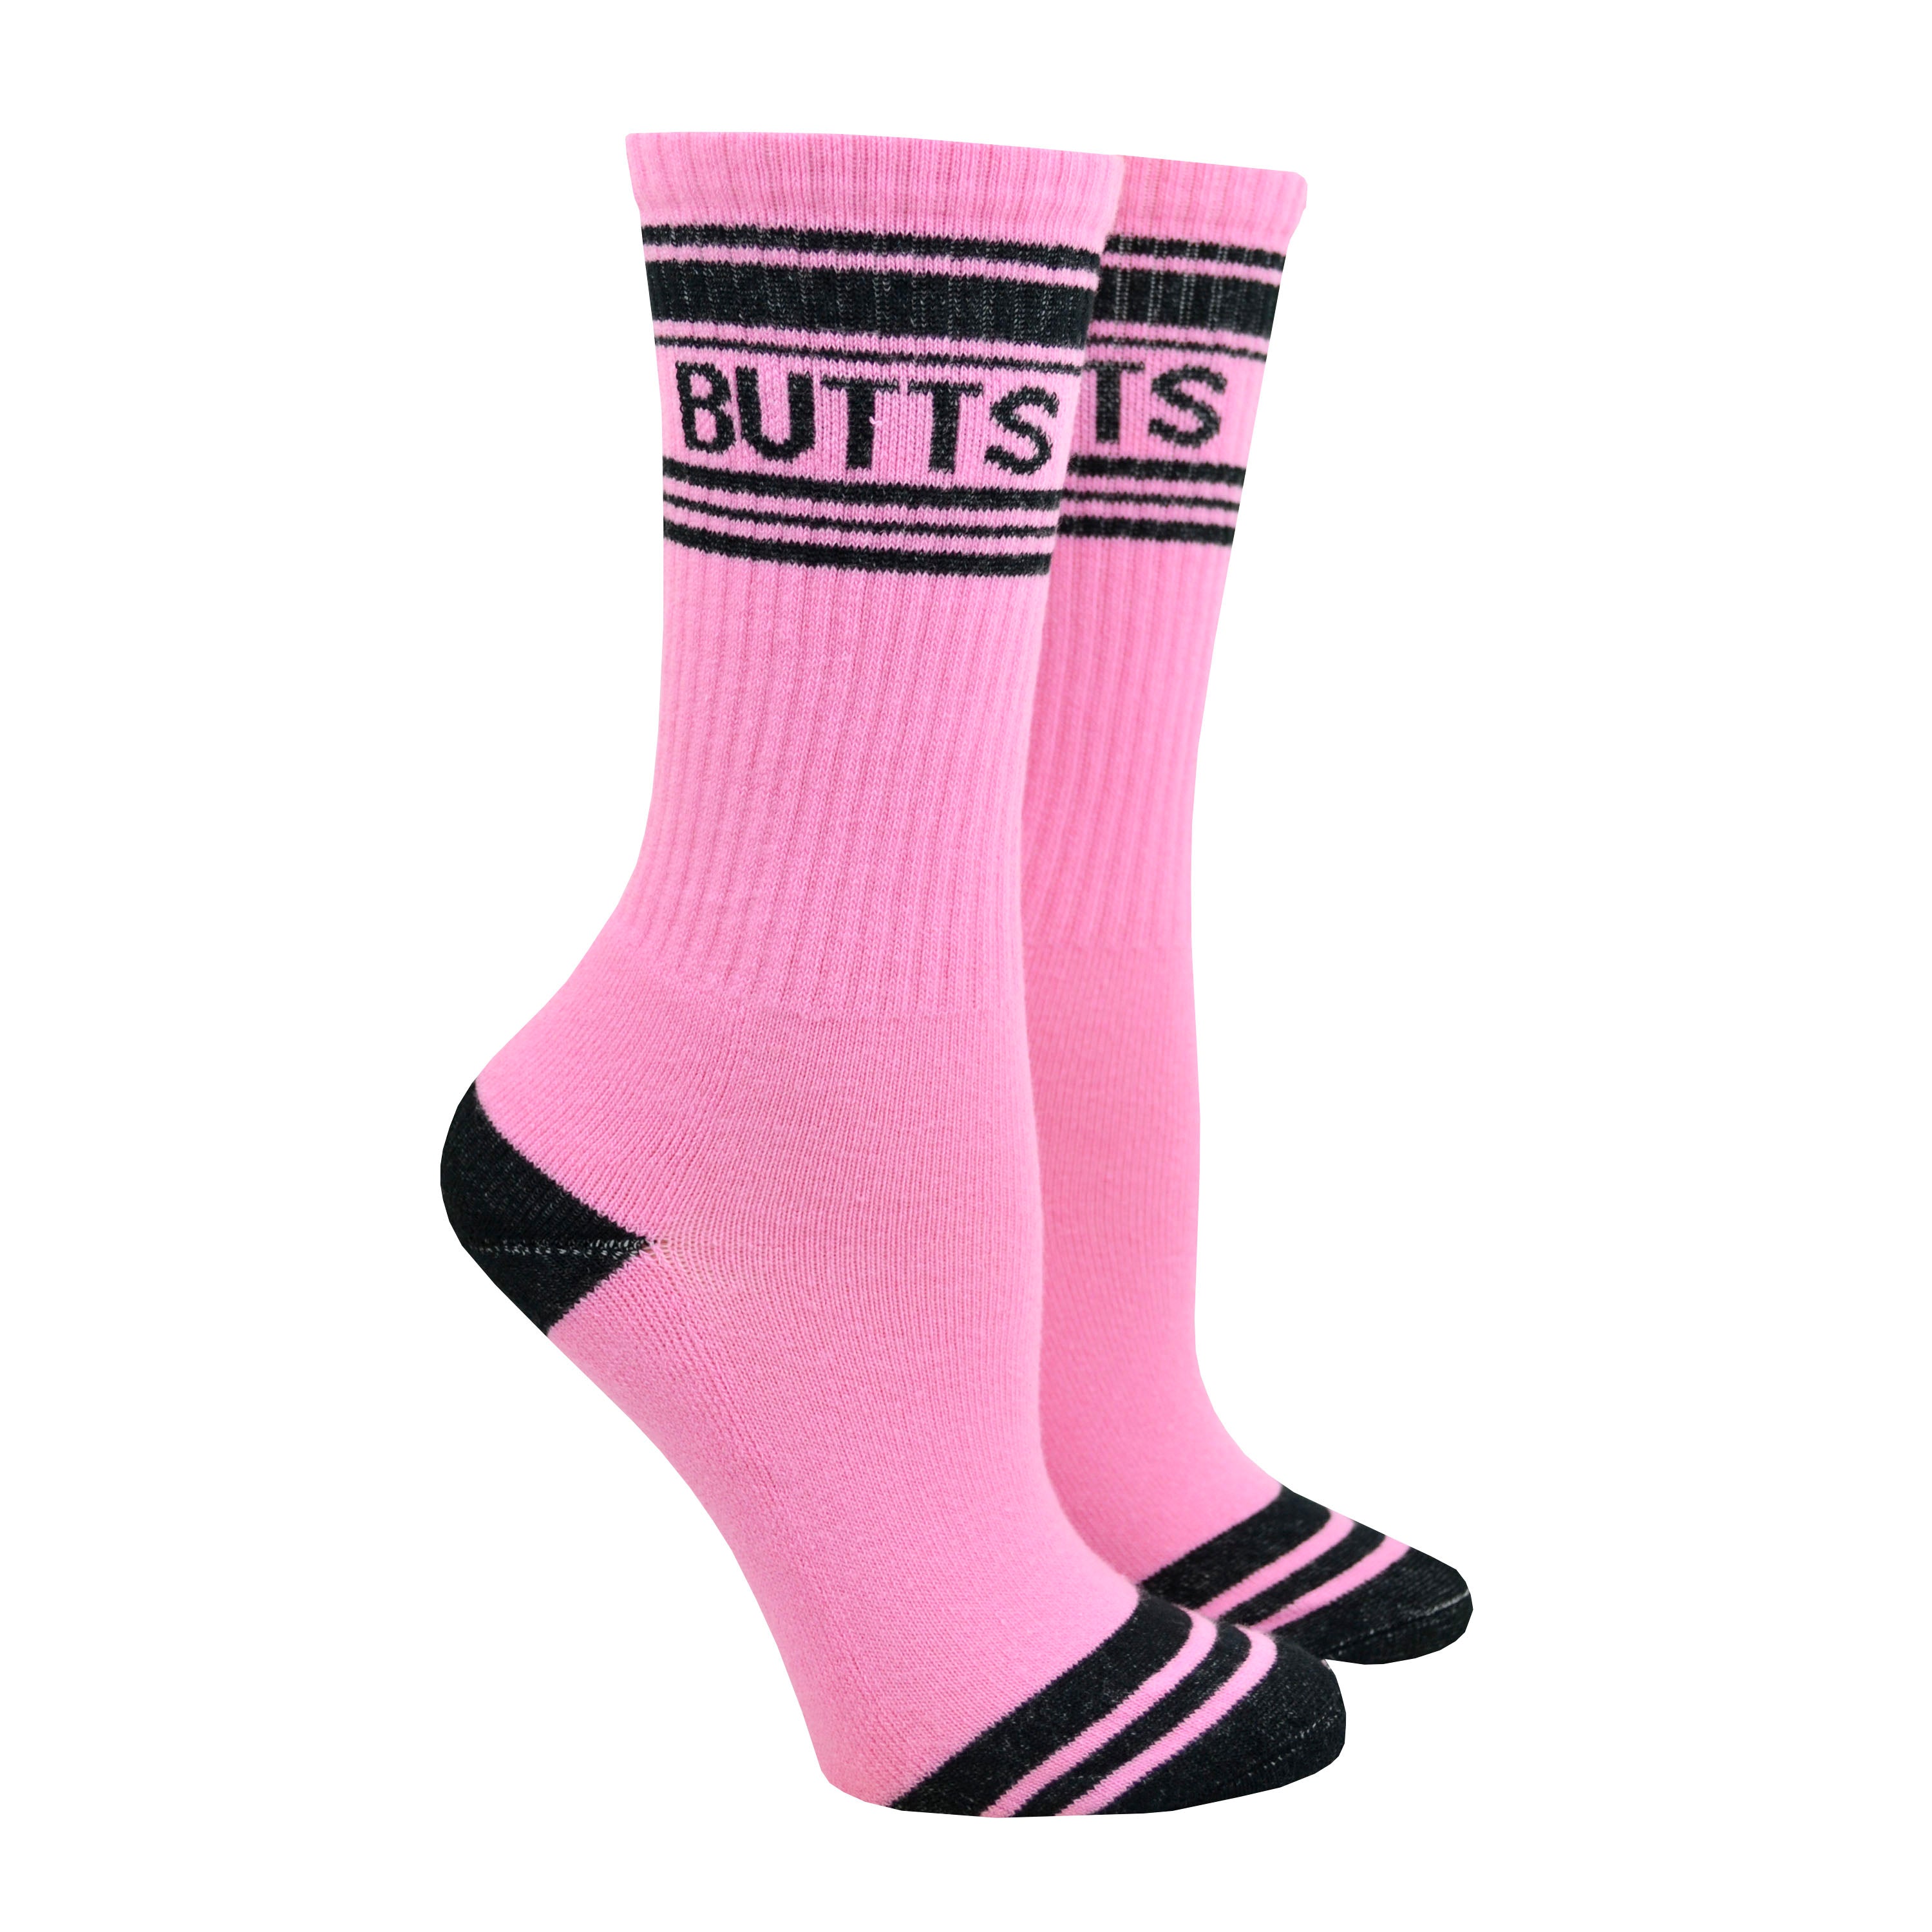 Shown on a leg form, these pink cotton unisex crew socks with a black striped toe and cuff by the brand Gumball Poodle feature the word 